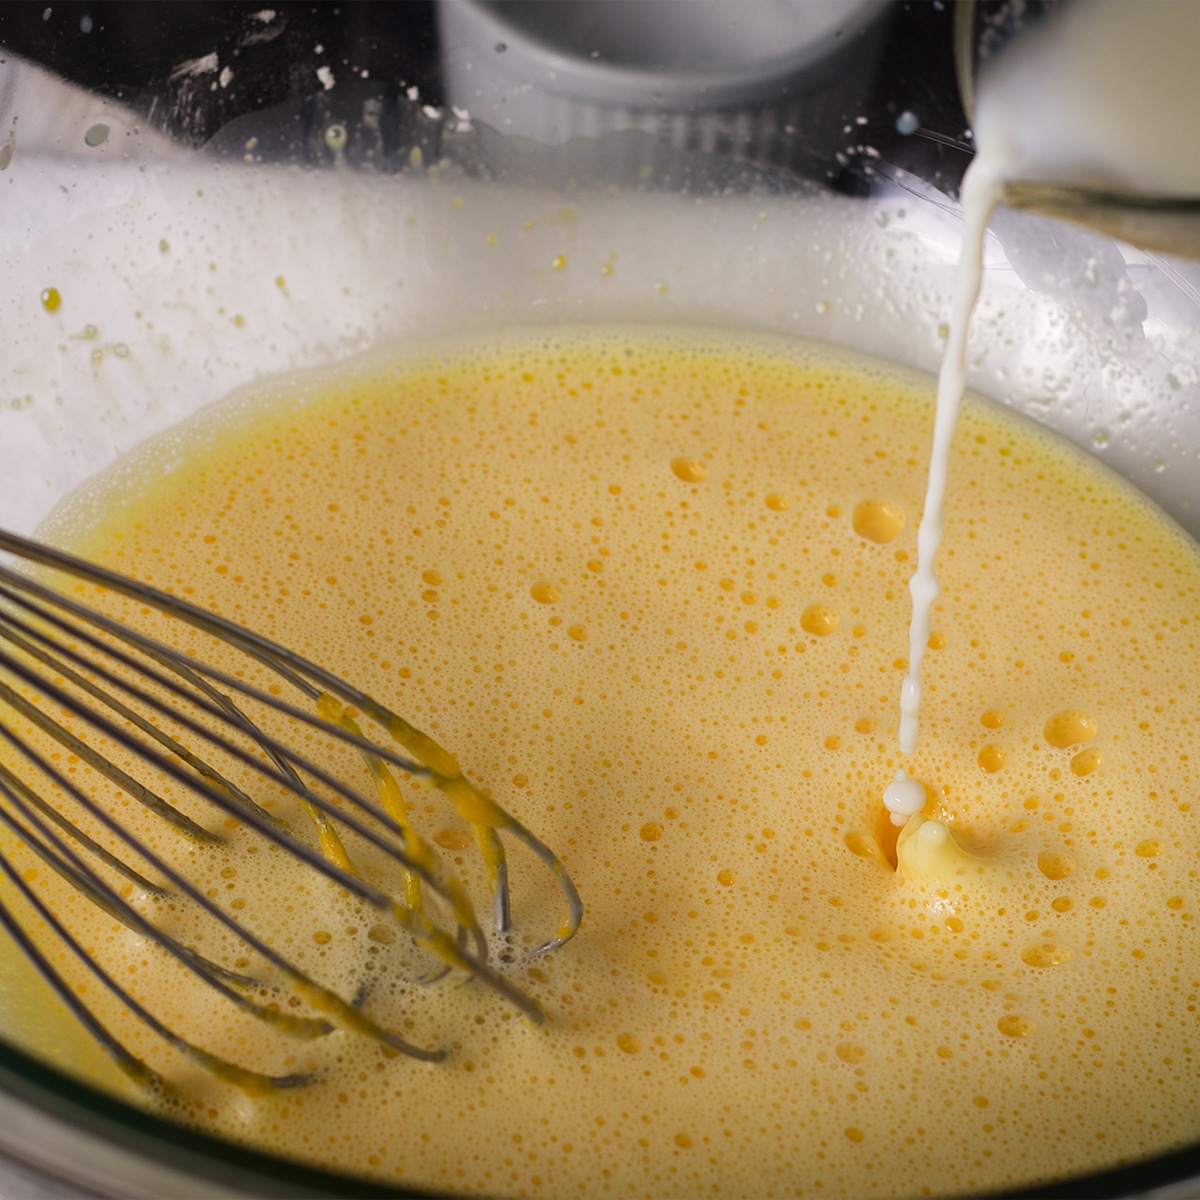 Pouring hot milk into egg yolks while stirring constantly with a wire whisk.